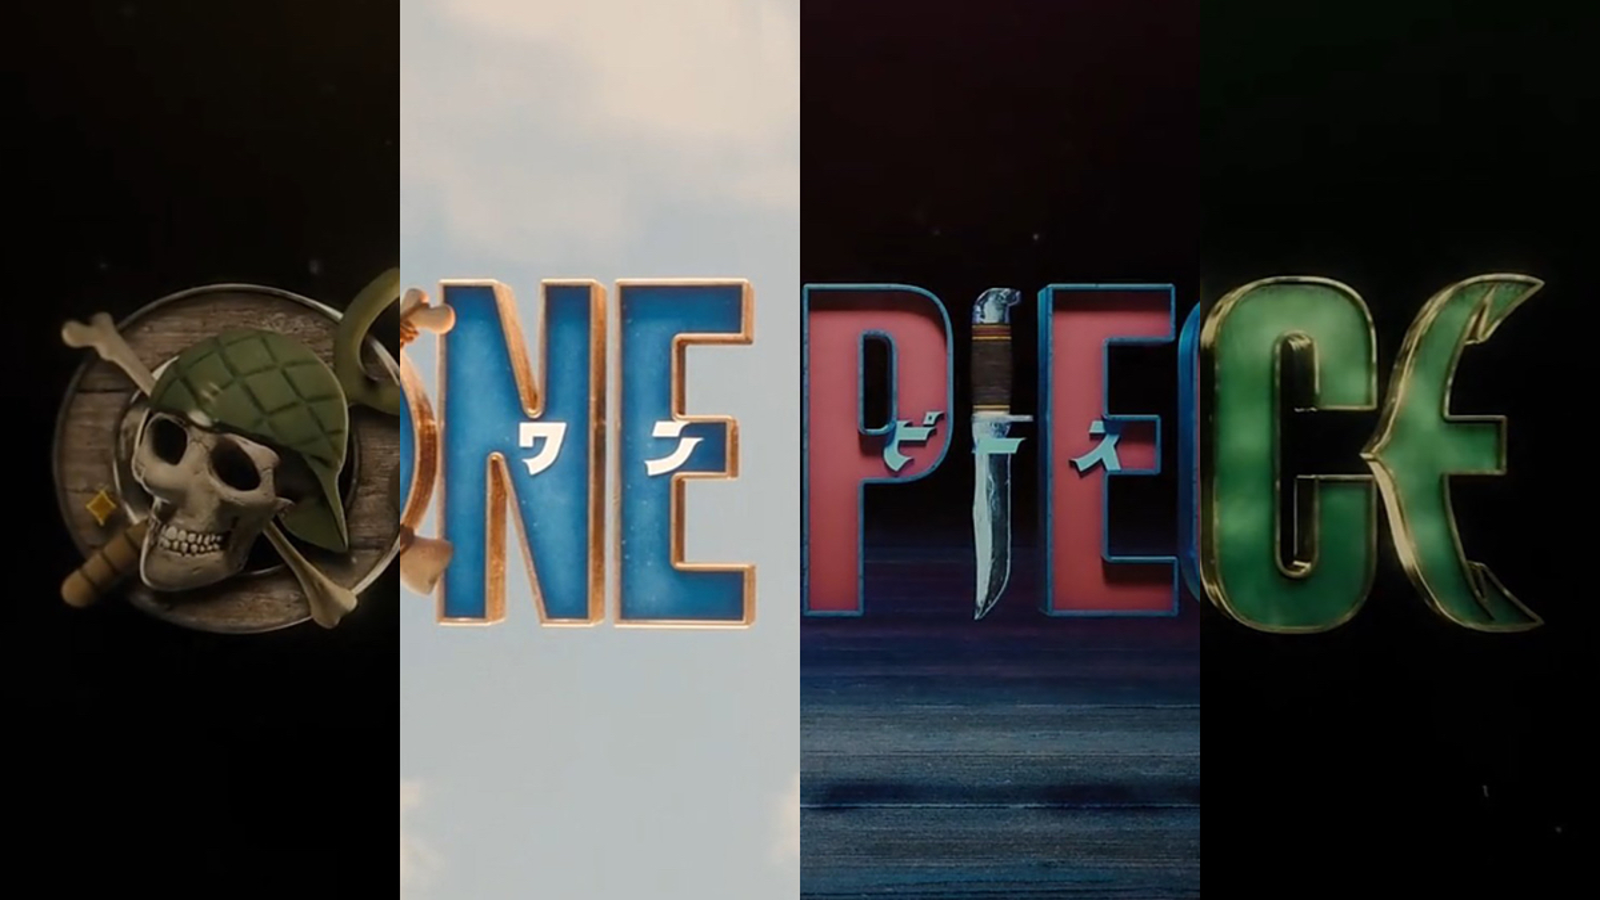 Can One Piece Live Action replace the introductory episodes of the anime?